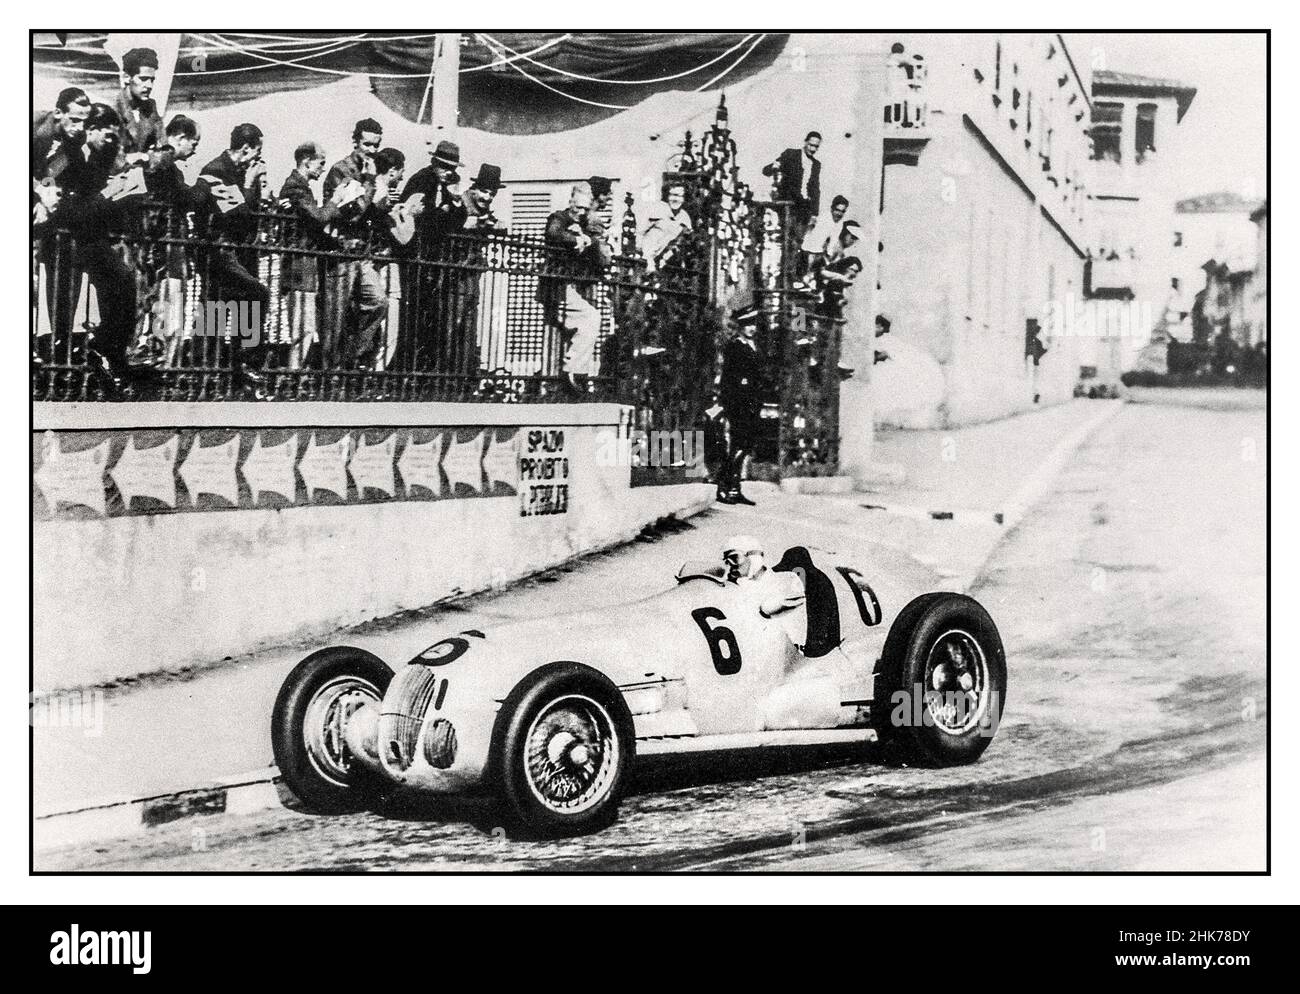 Hermann Lang  Mercedes No 6 at Montenero 1937 coming in a very close second to his Mercedes team mate. The 1937 Italian Grand Prix was held on September 12 at the Montenero Circuit near Livorna. Polesitter Rudolf Caracciola won a tough battle with Mercedes o Hermann Lang less than a second behind at the finish. Bernd Rosemeyer was third in an Auto Union. Stock Photo